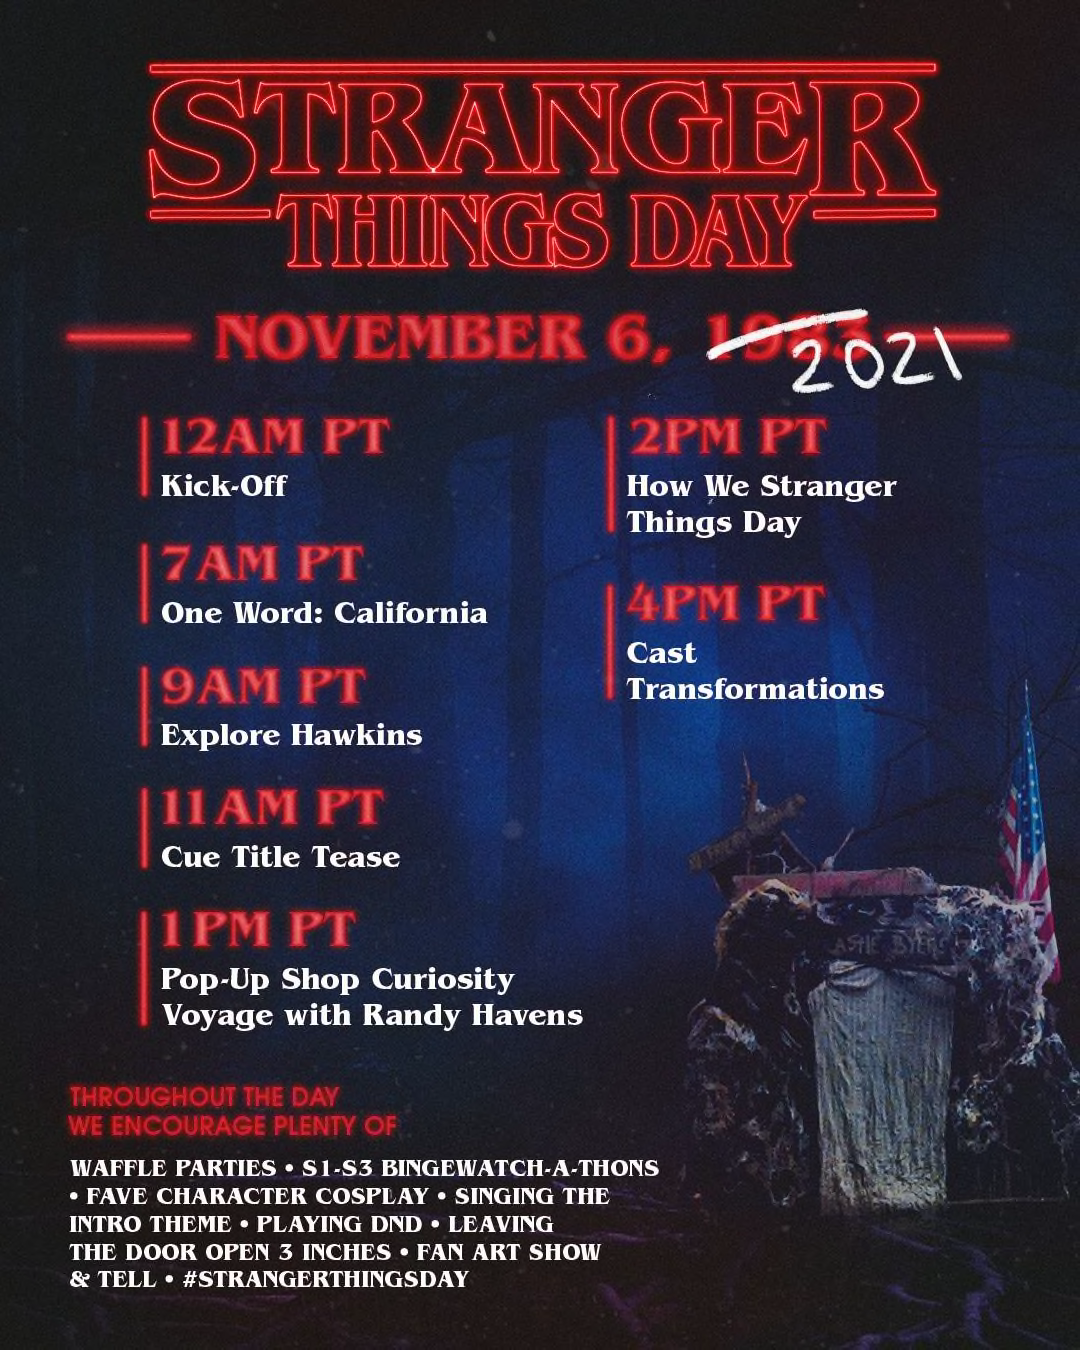 Stranger Things: The Official Store